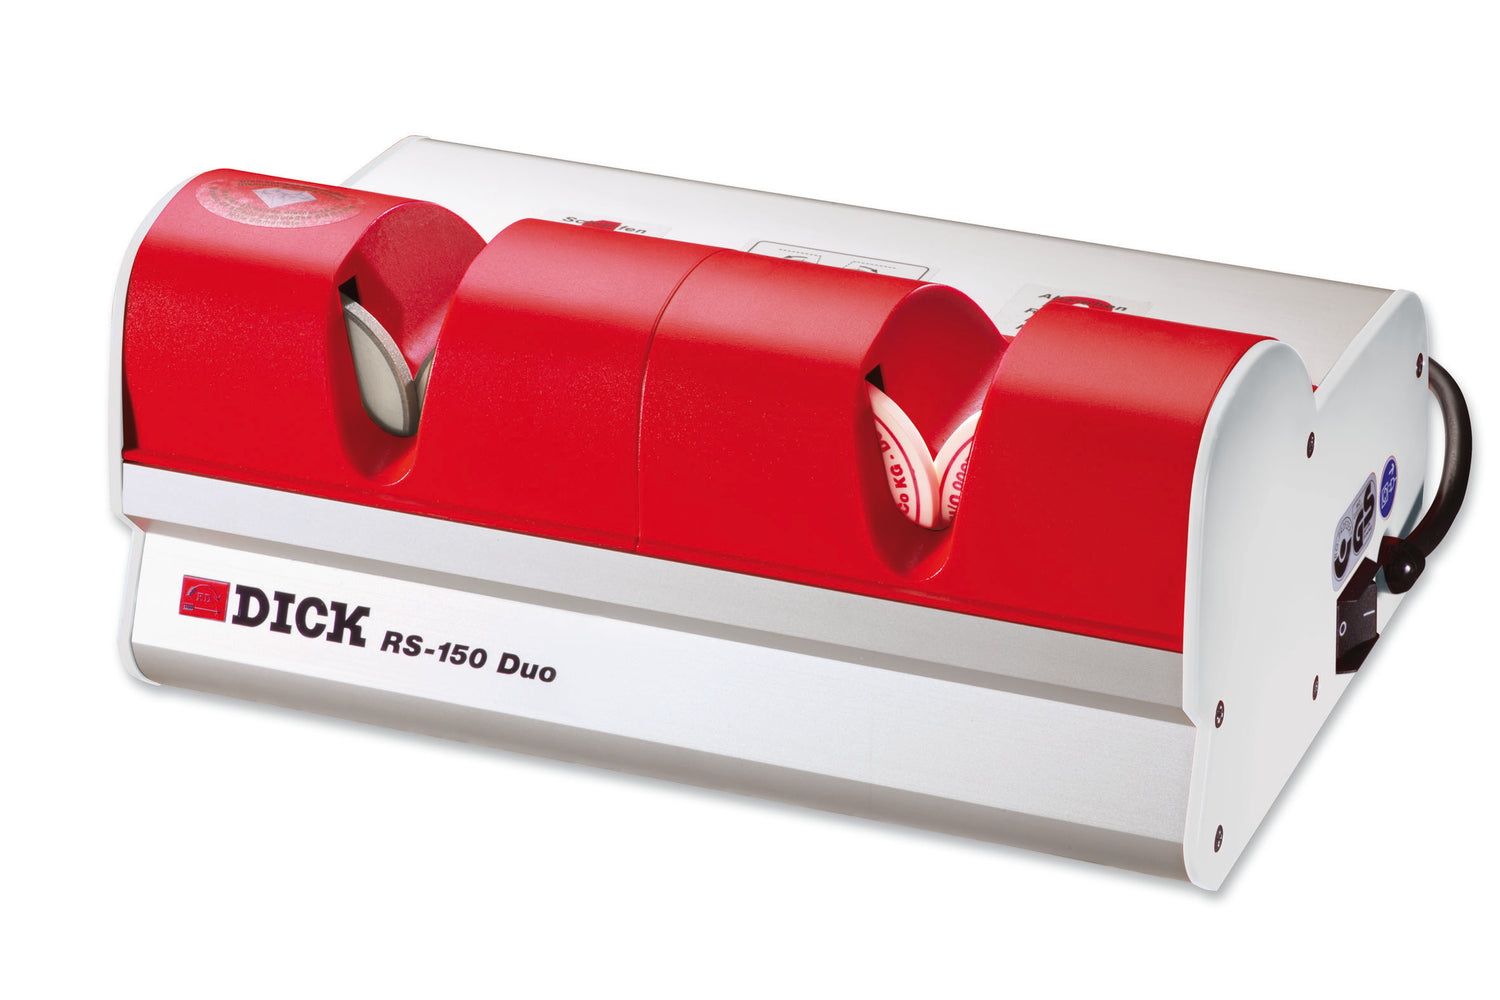 F. Dick® RS-150 DUO Commercial Knife Sharpening Machine